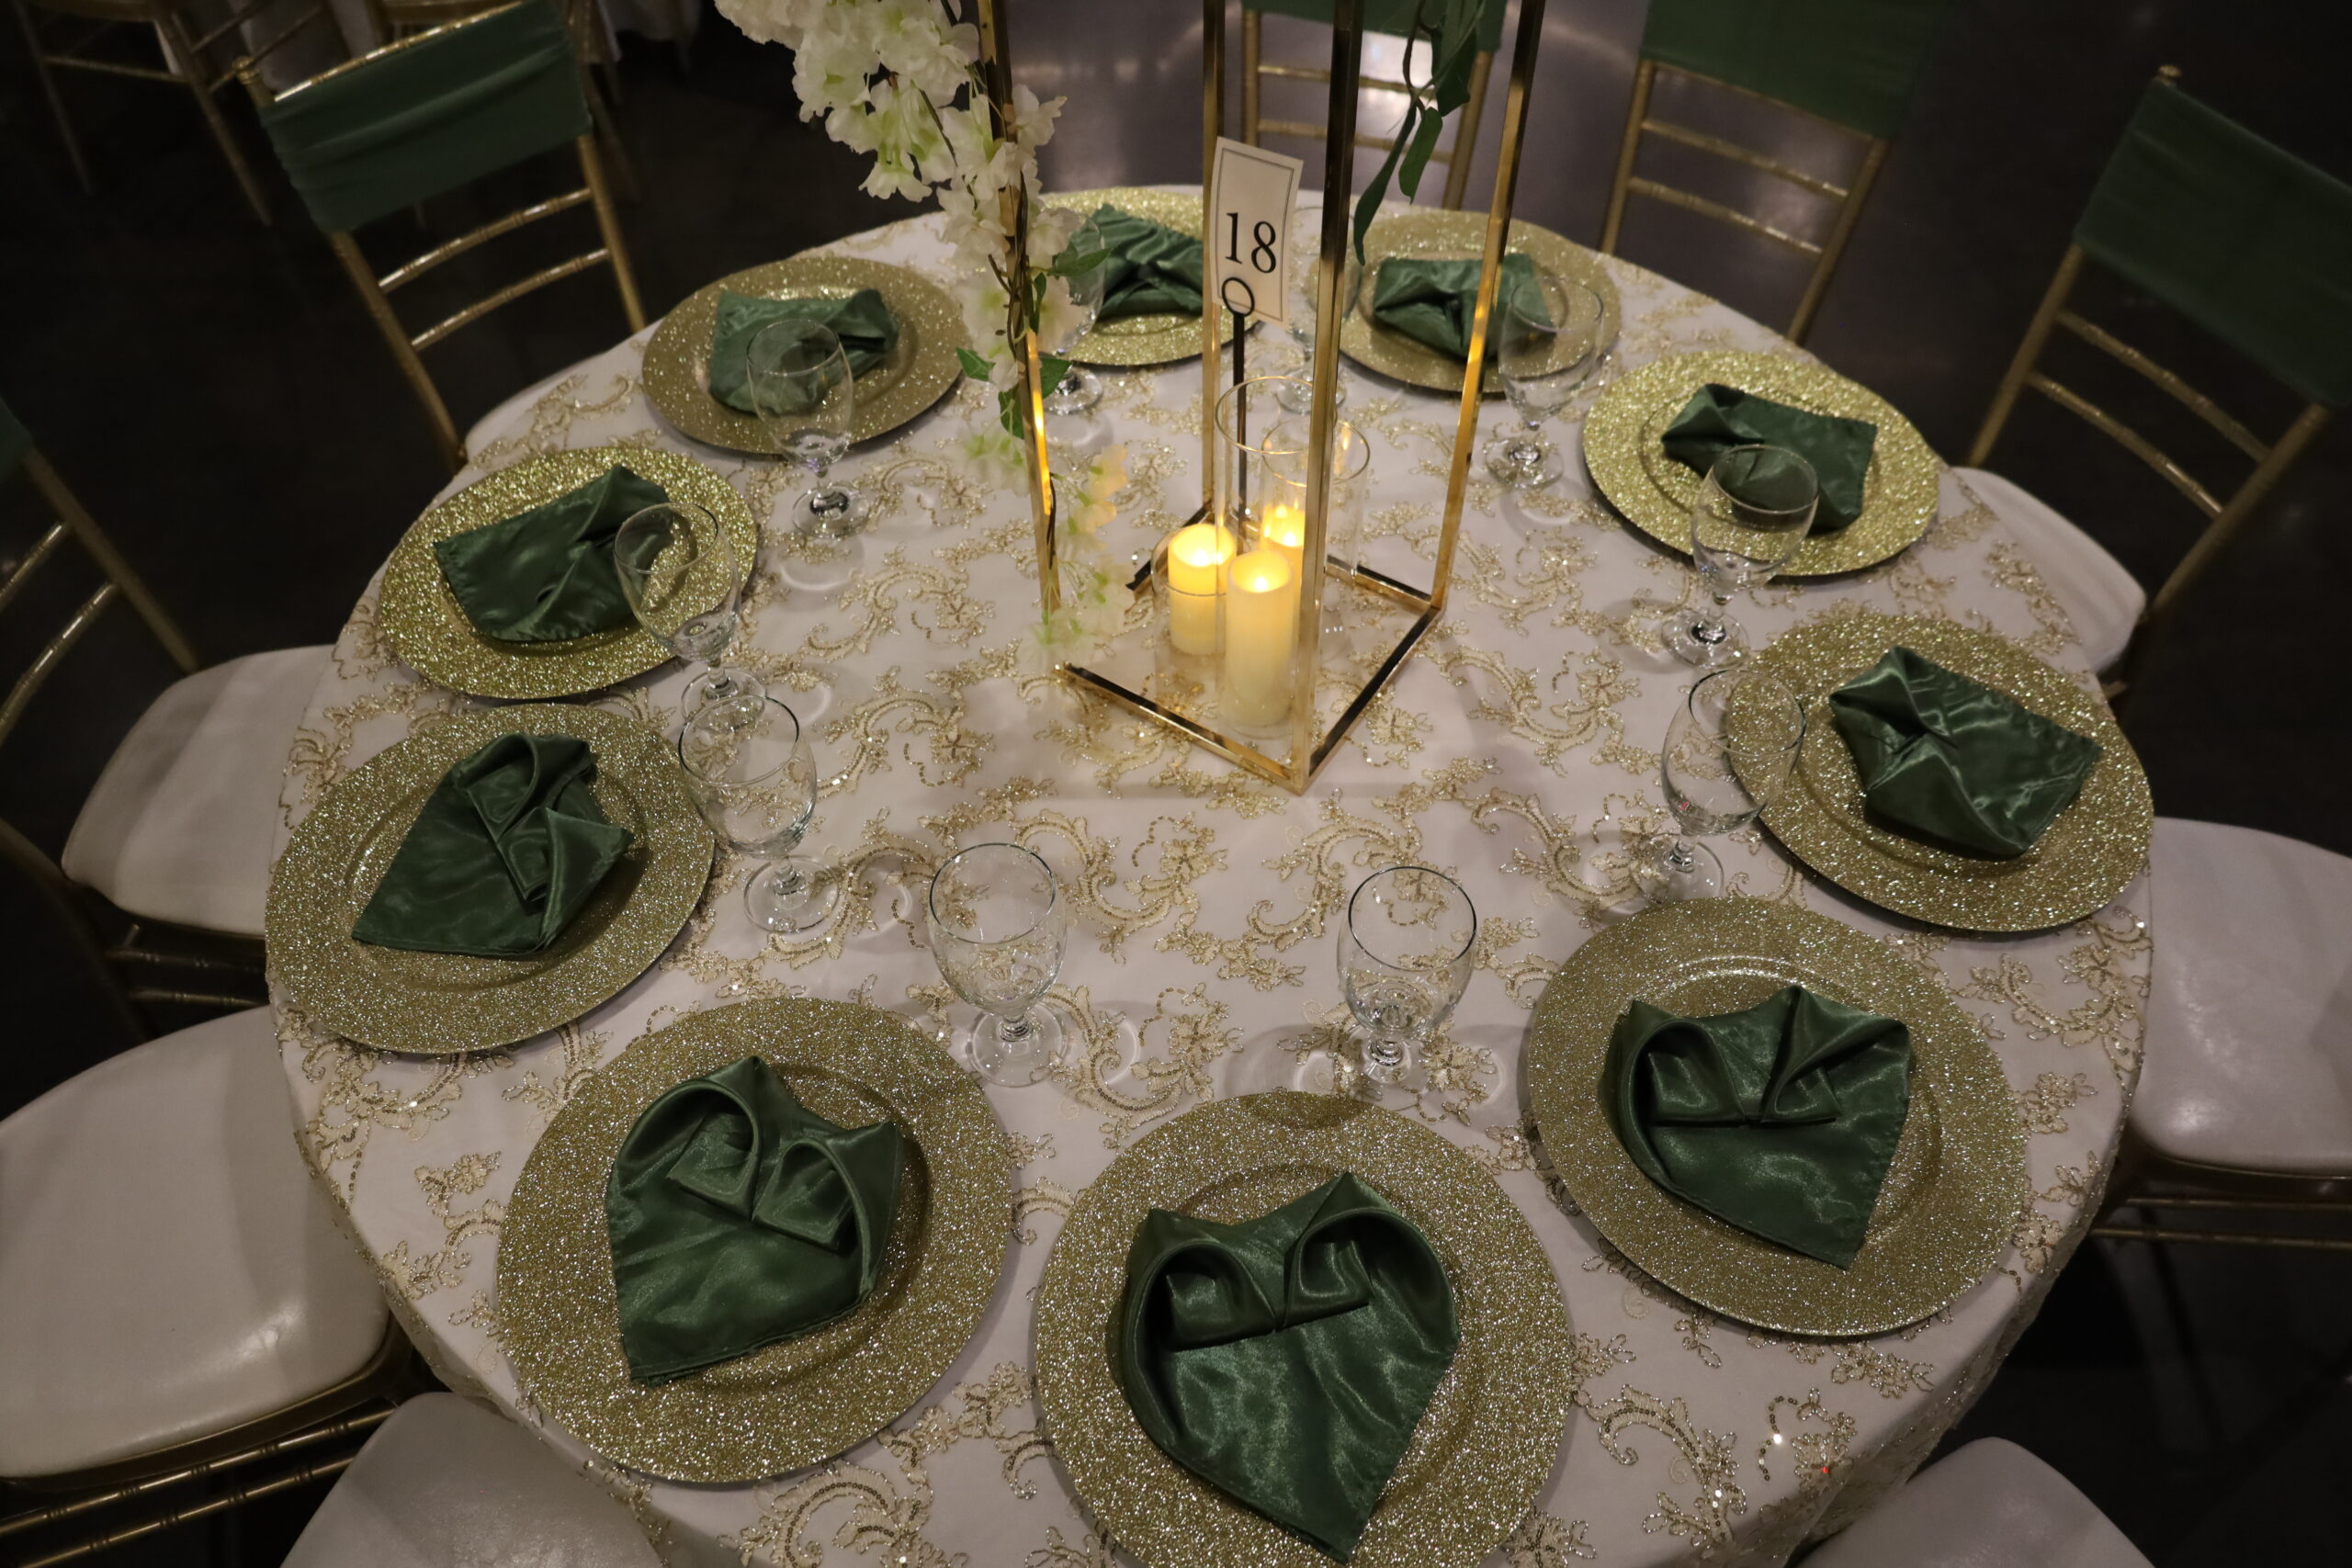 Wedding Reception, Wedding Venue, Full Bar, Amenities, Bride & Groom, Green and Gold color scheme, Tall centerpieces, white and cream flowers